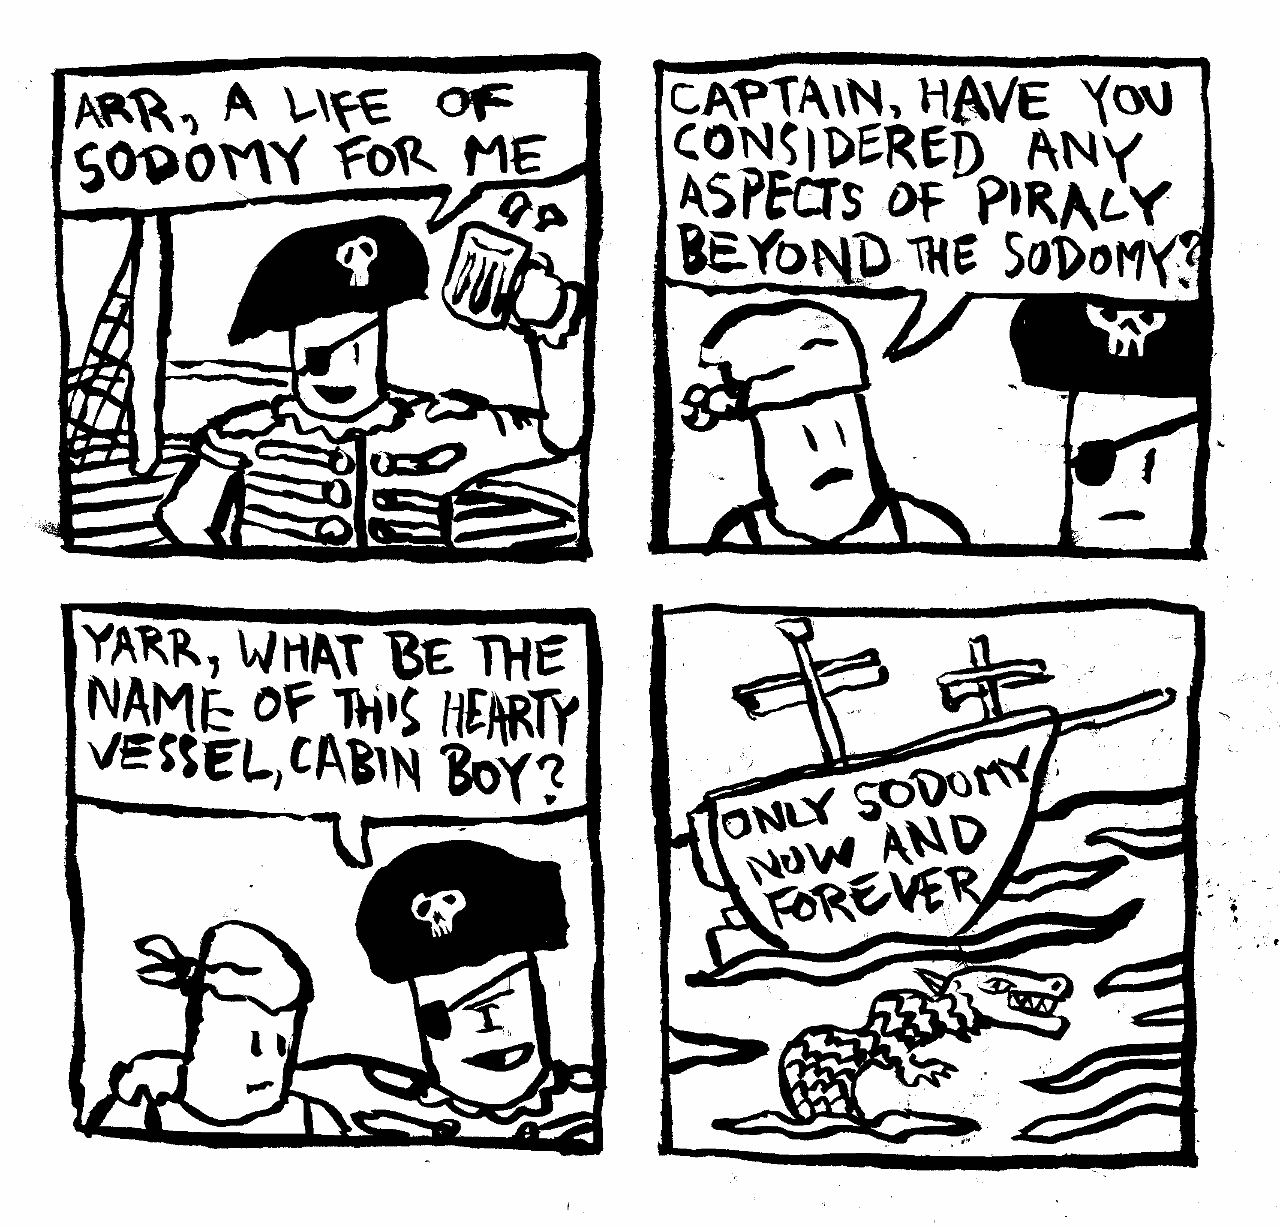 Life of sodomy captain cabin boy pirate ship bottle of rum buttsex anal sex gay sex